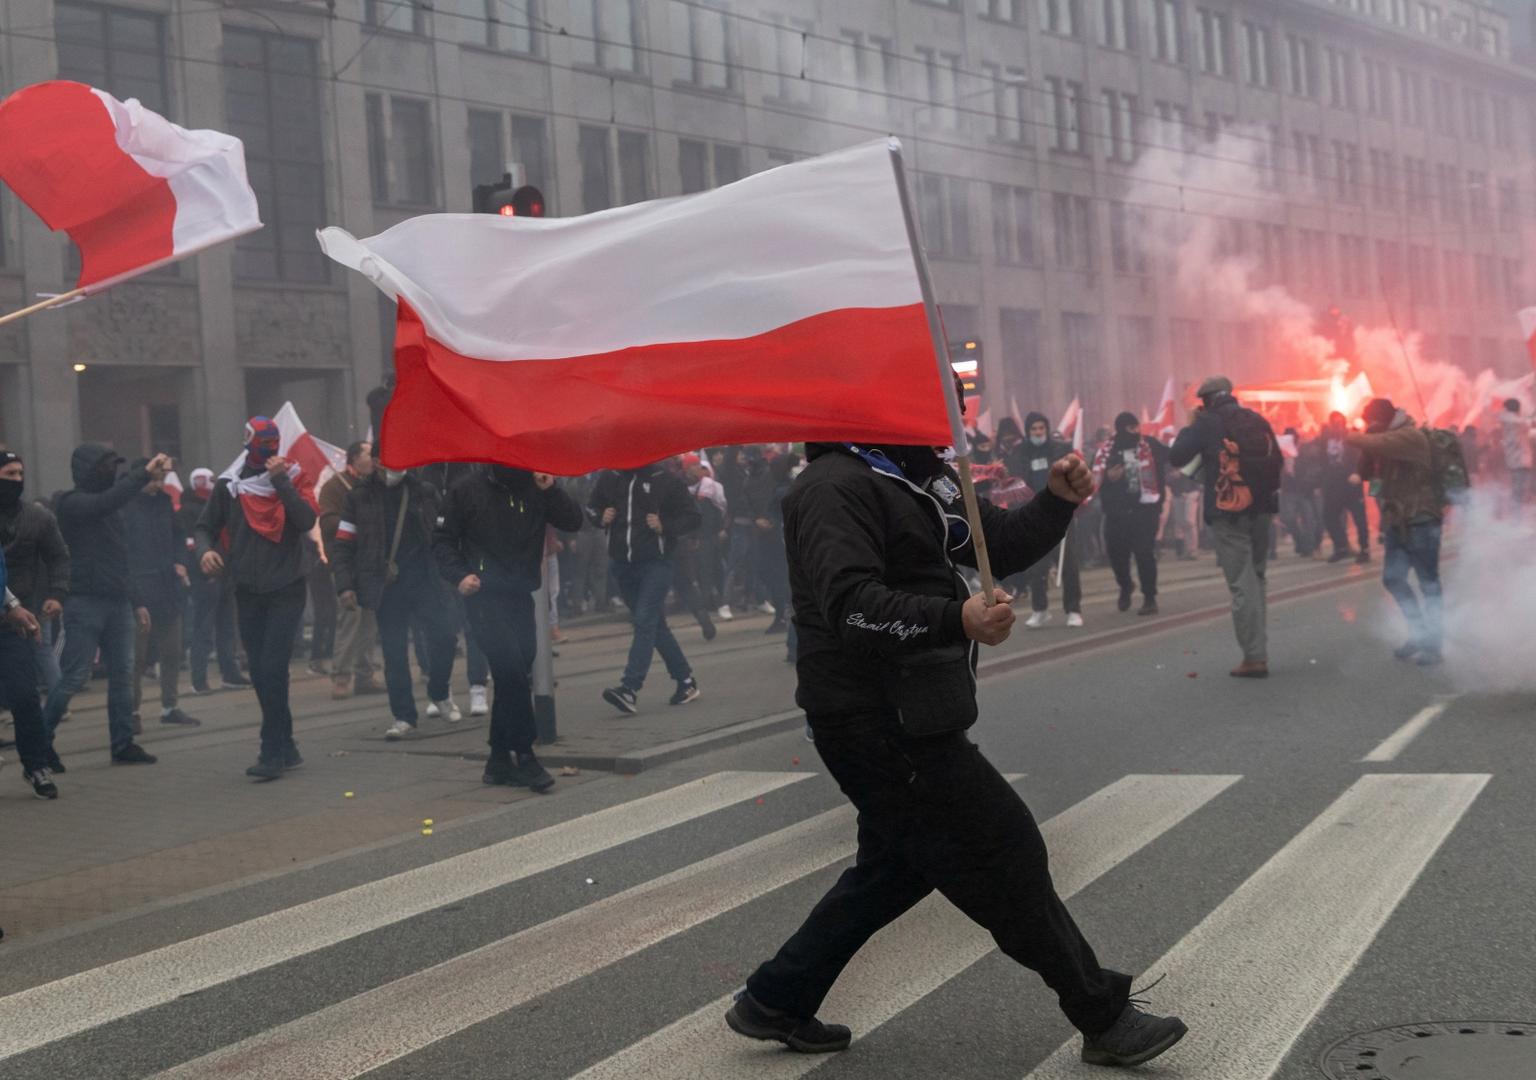 People mark the National Independence Day in Warsaw A demonstrator carries a Polish flag during a march marking the National Independence Day in Warsaw, Poland November 11, 2020. Jedrzej Nowicki/Agencja Gazeta/via REUTERS   ATTENTION EDITORS - THIS IMAGE WAS PROVIDED BY A THIRD PARTY. POLAND OUT. NO COMMERCIAL OR EDITORIAL SALES IN POLAND. JEDRZEJ NOWICKI